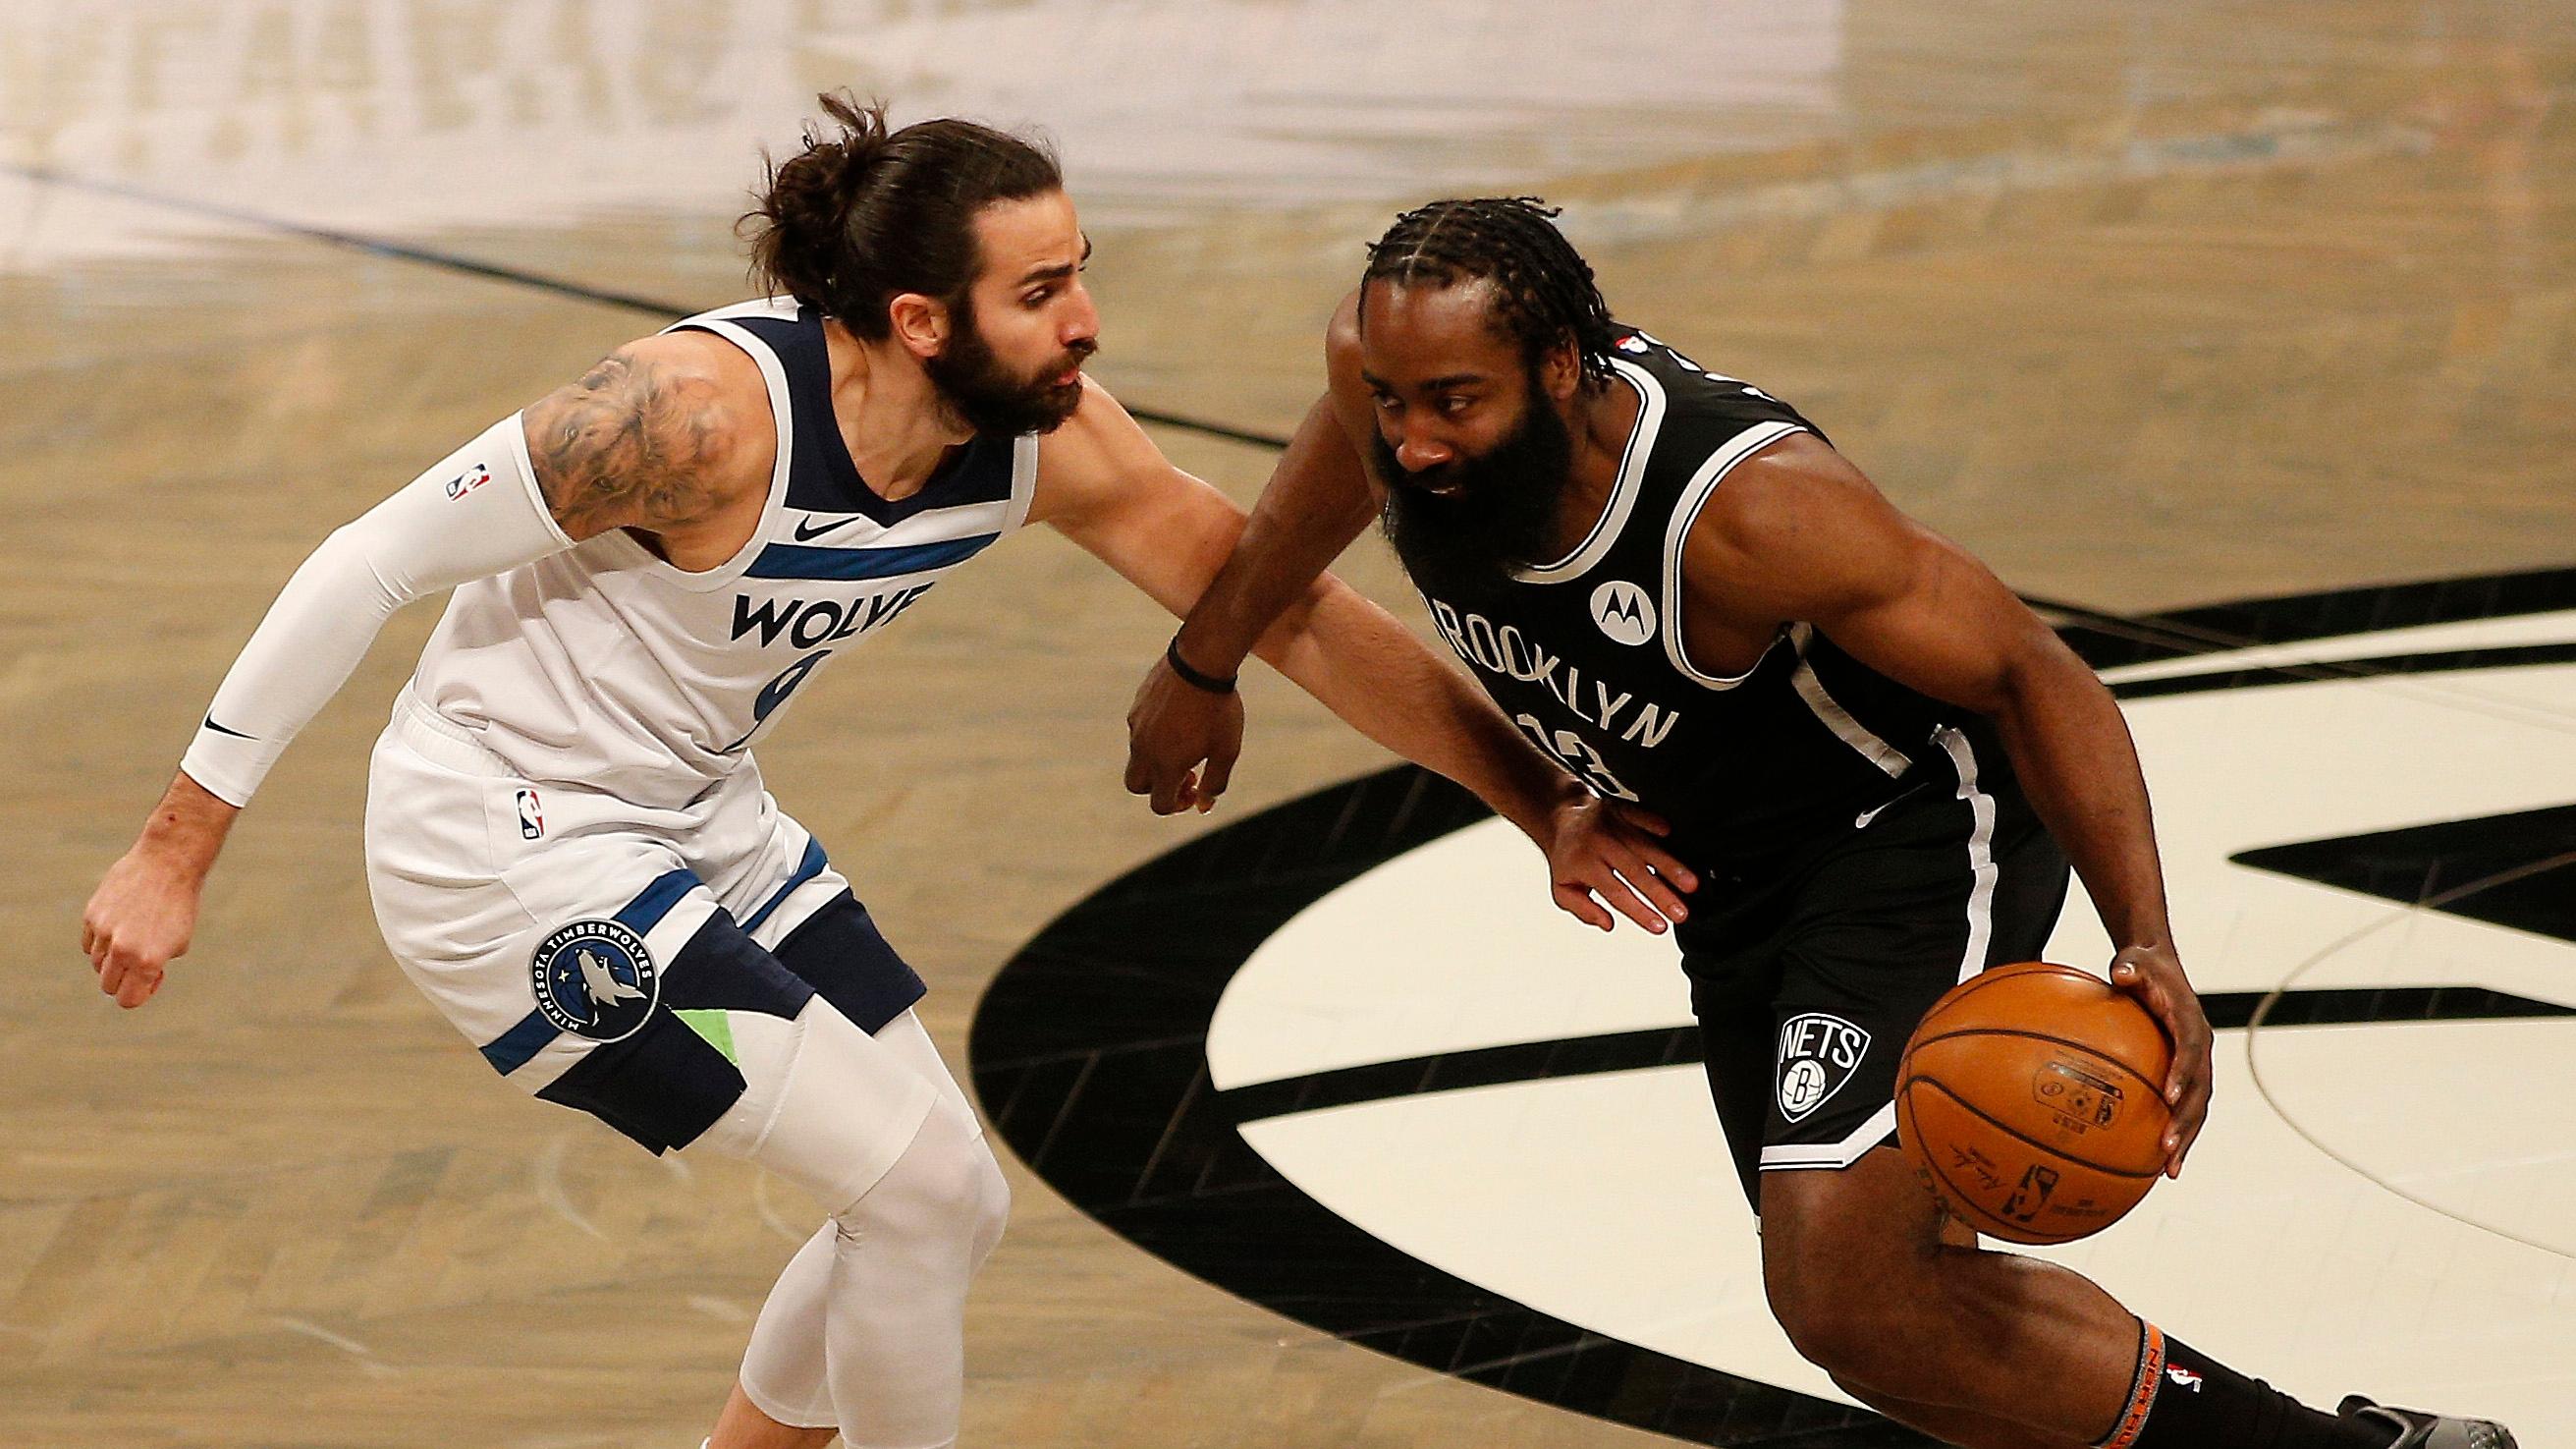 Brooklyn Nets guard James Harden (13) dribbles the ball against Minnesota Timberwolves guard Ricky Rubio (9) during the first half at Barclays Center. / Andy Marlin-USA TODAY Sports